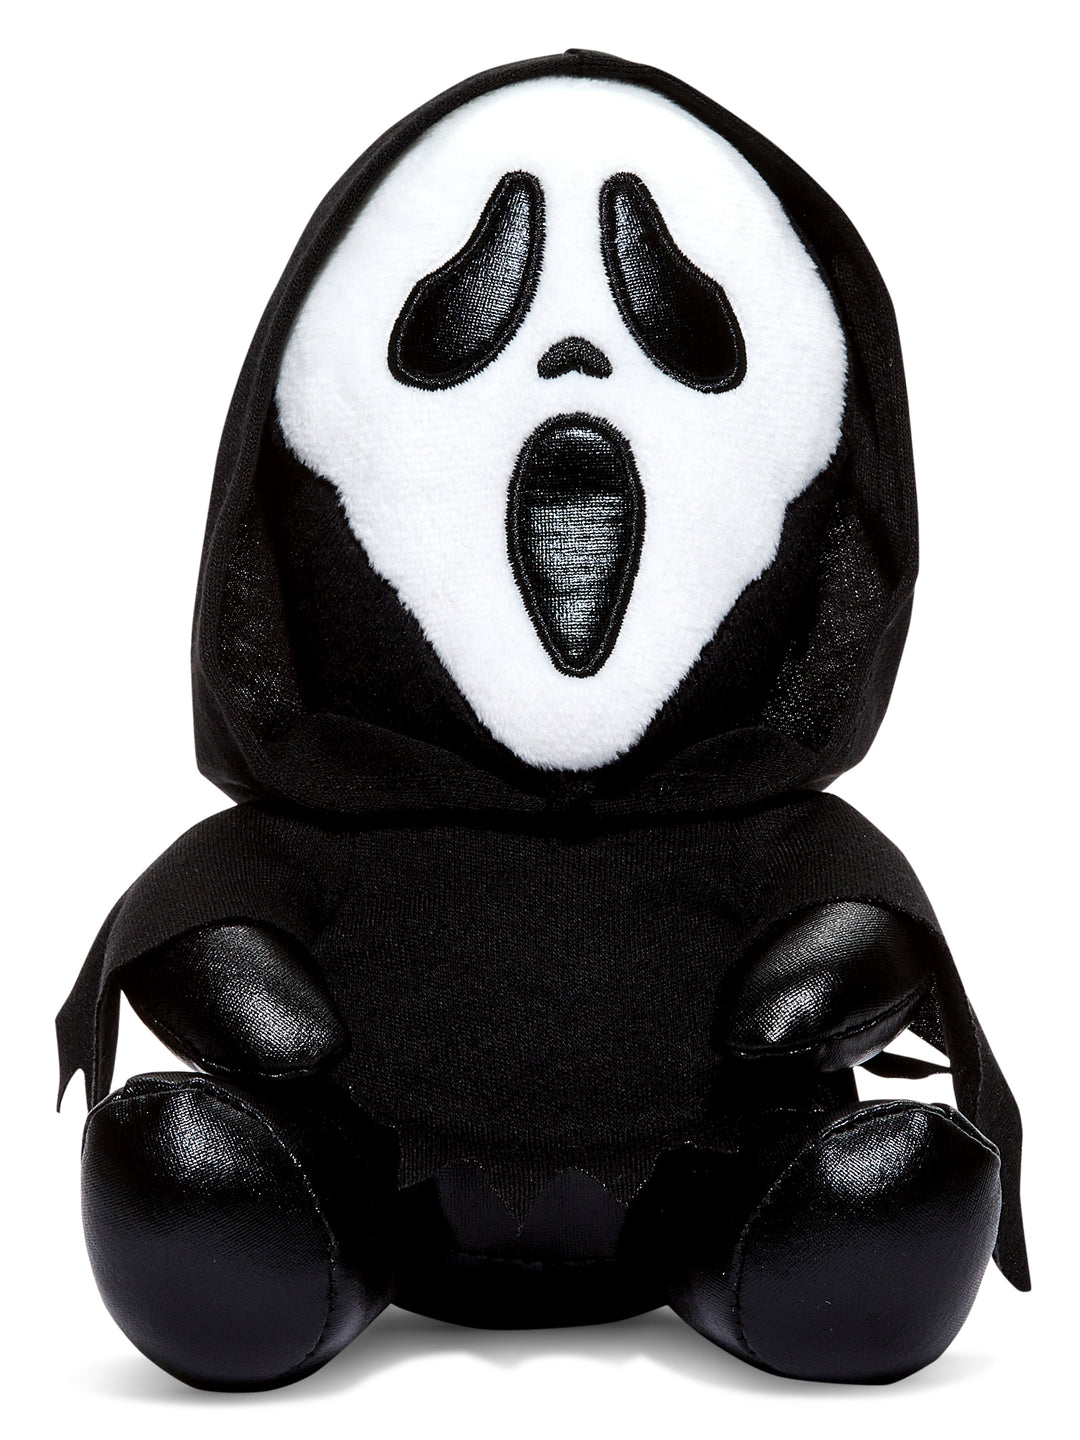 Officially Licensed GhostFace Scream Plush